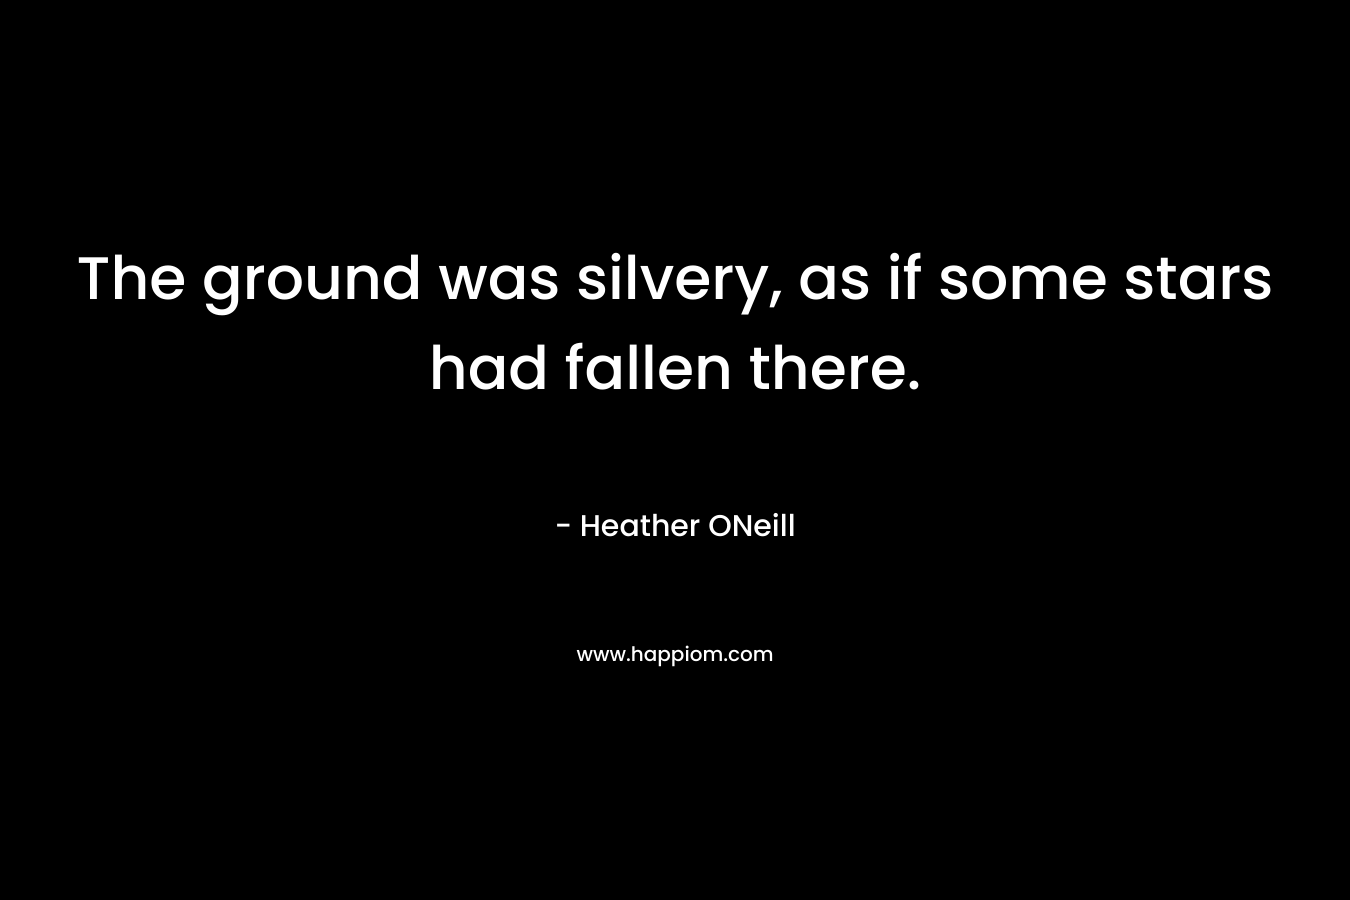 The ground was silvery, as if some stars had fallen there. – Heather ONeill